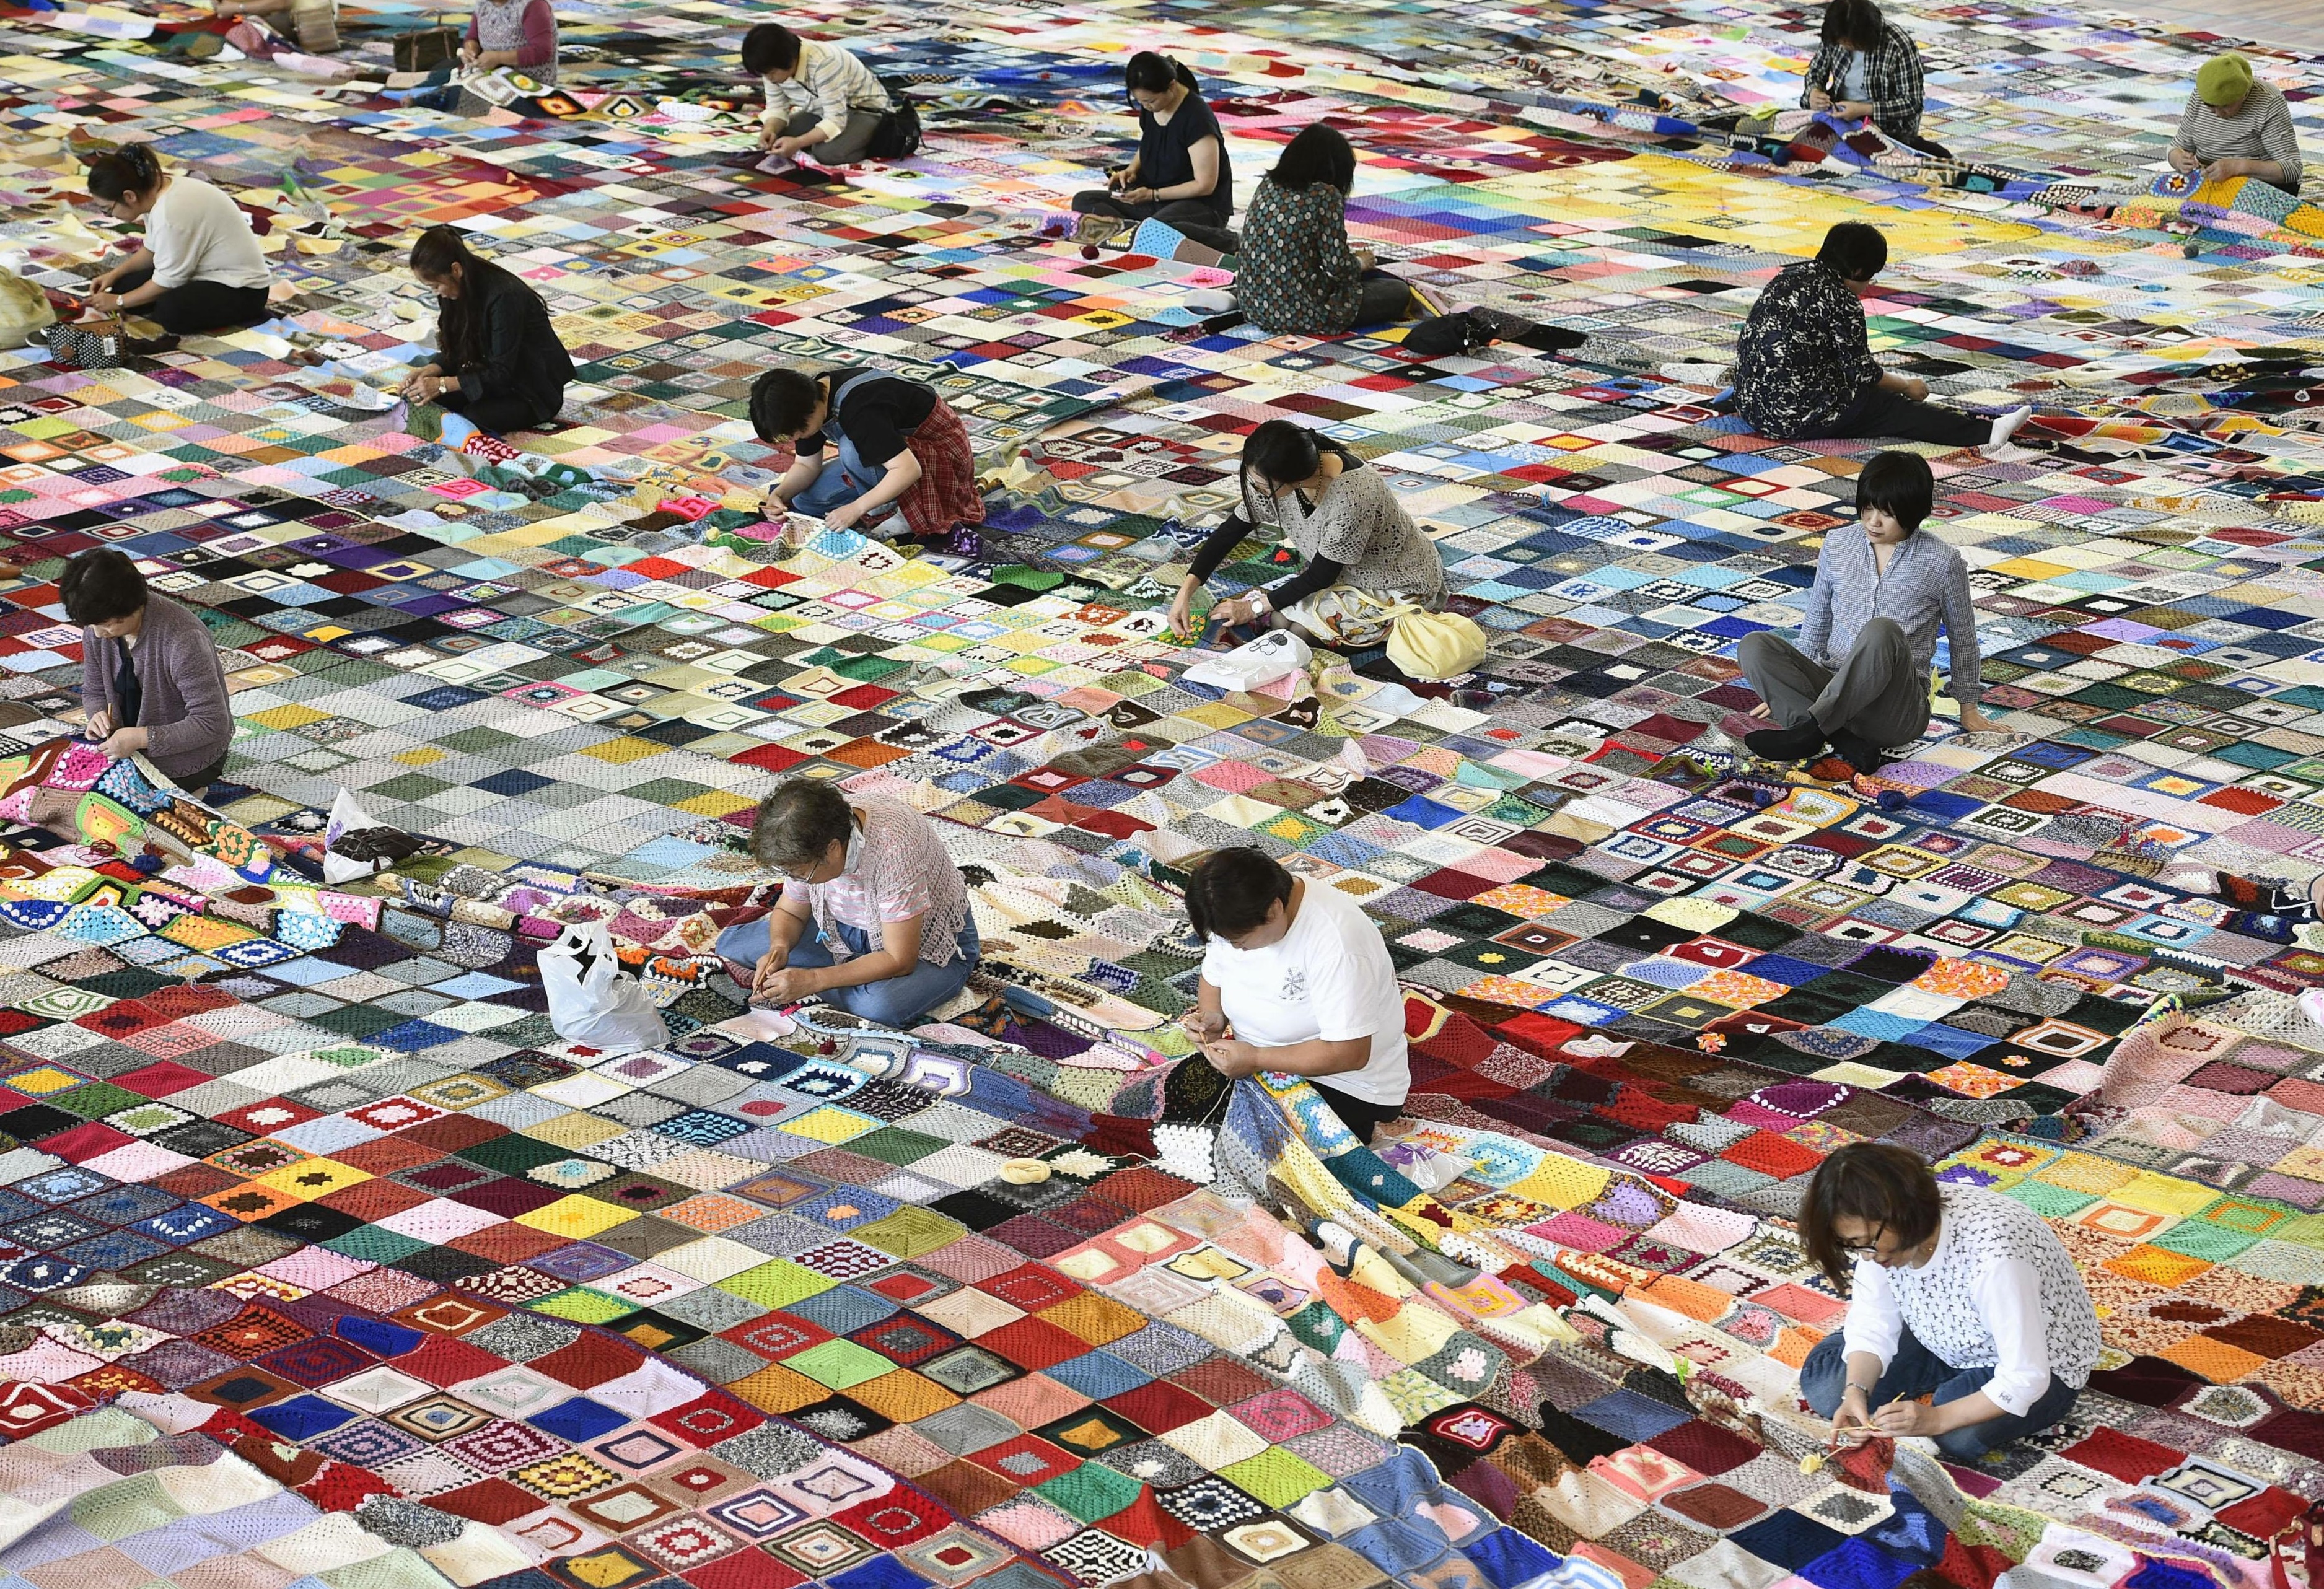 Quake victims' giant blanket gains Guinness record - The Japan Times